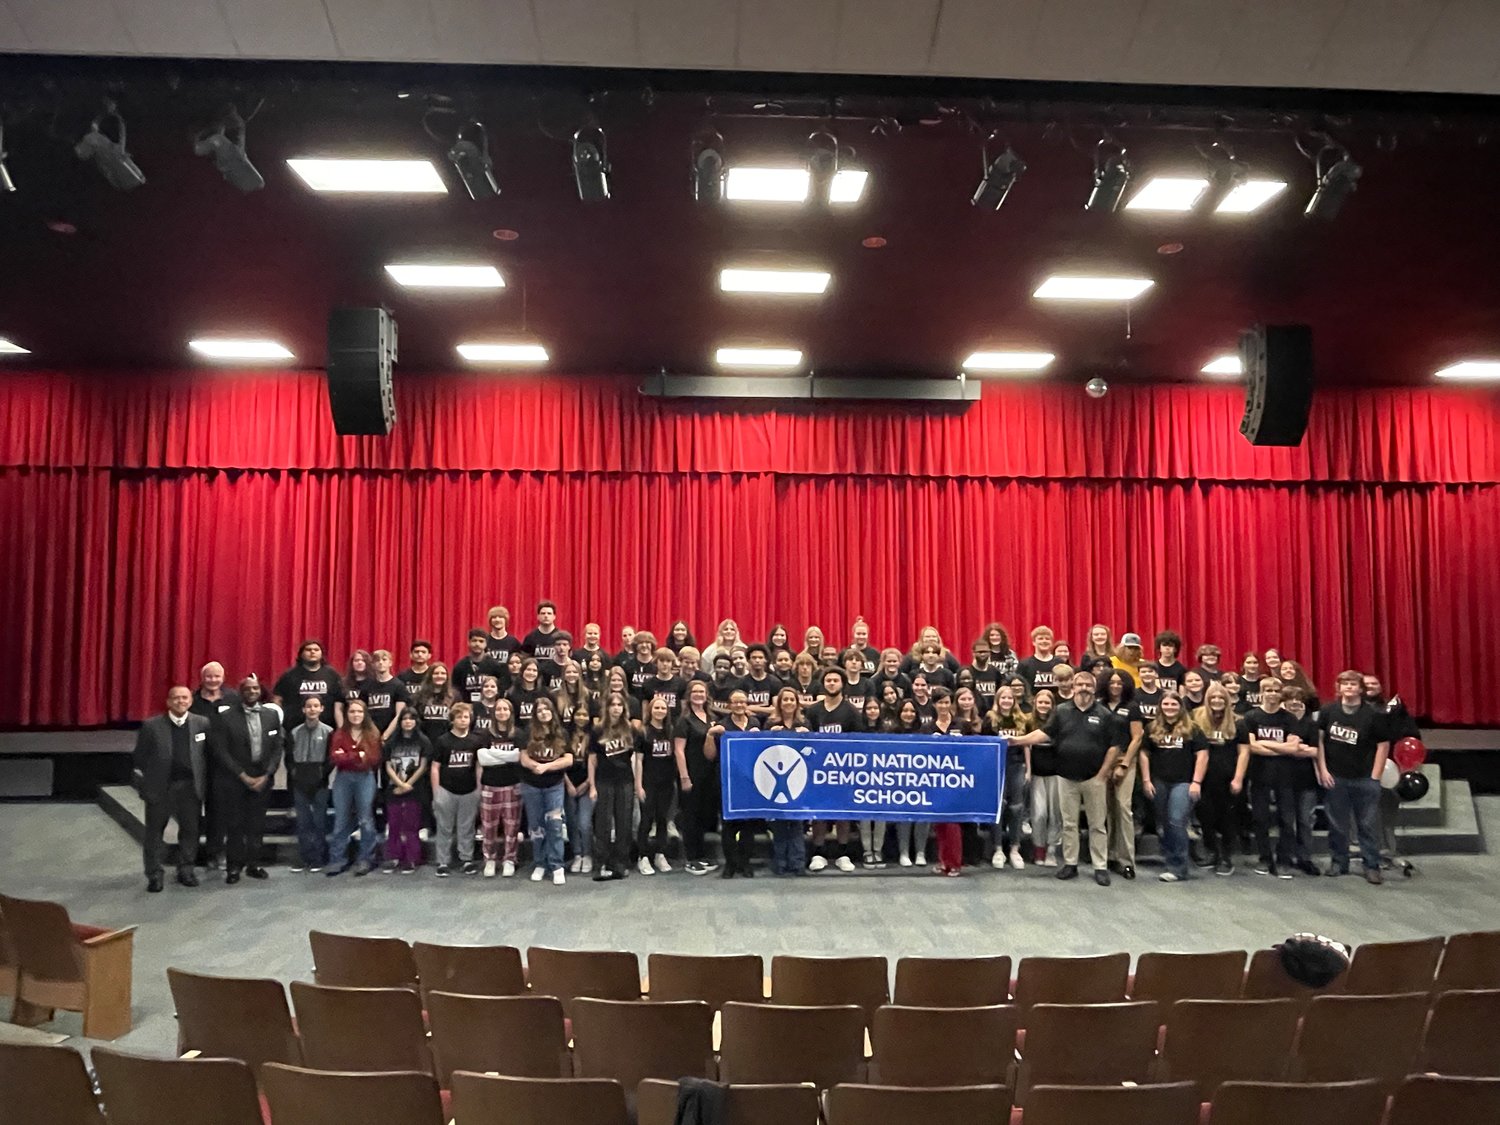 Students and staff at Chatham Central High School's AVID program pose in the school's auditorium alonside the Chatham County Board of Education on Dec. 13. CCHS was recognized as an AVID National Demonstration Site for its continued success using AVID strategies.